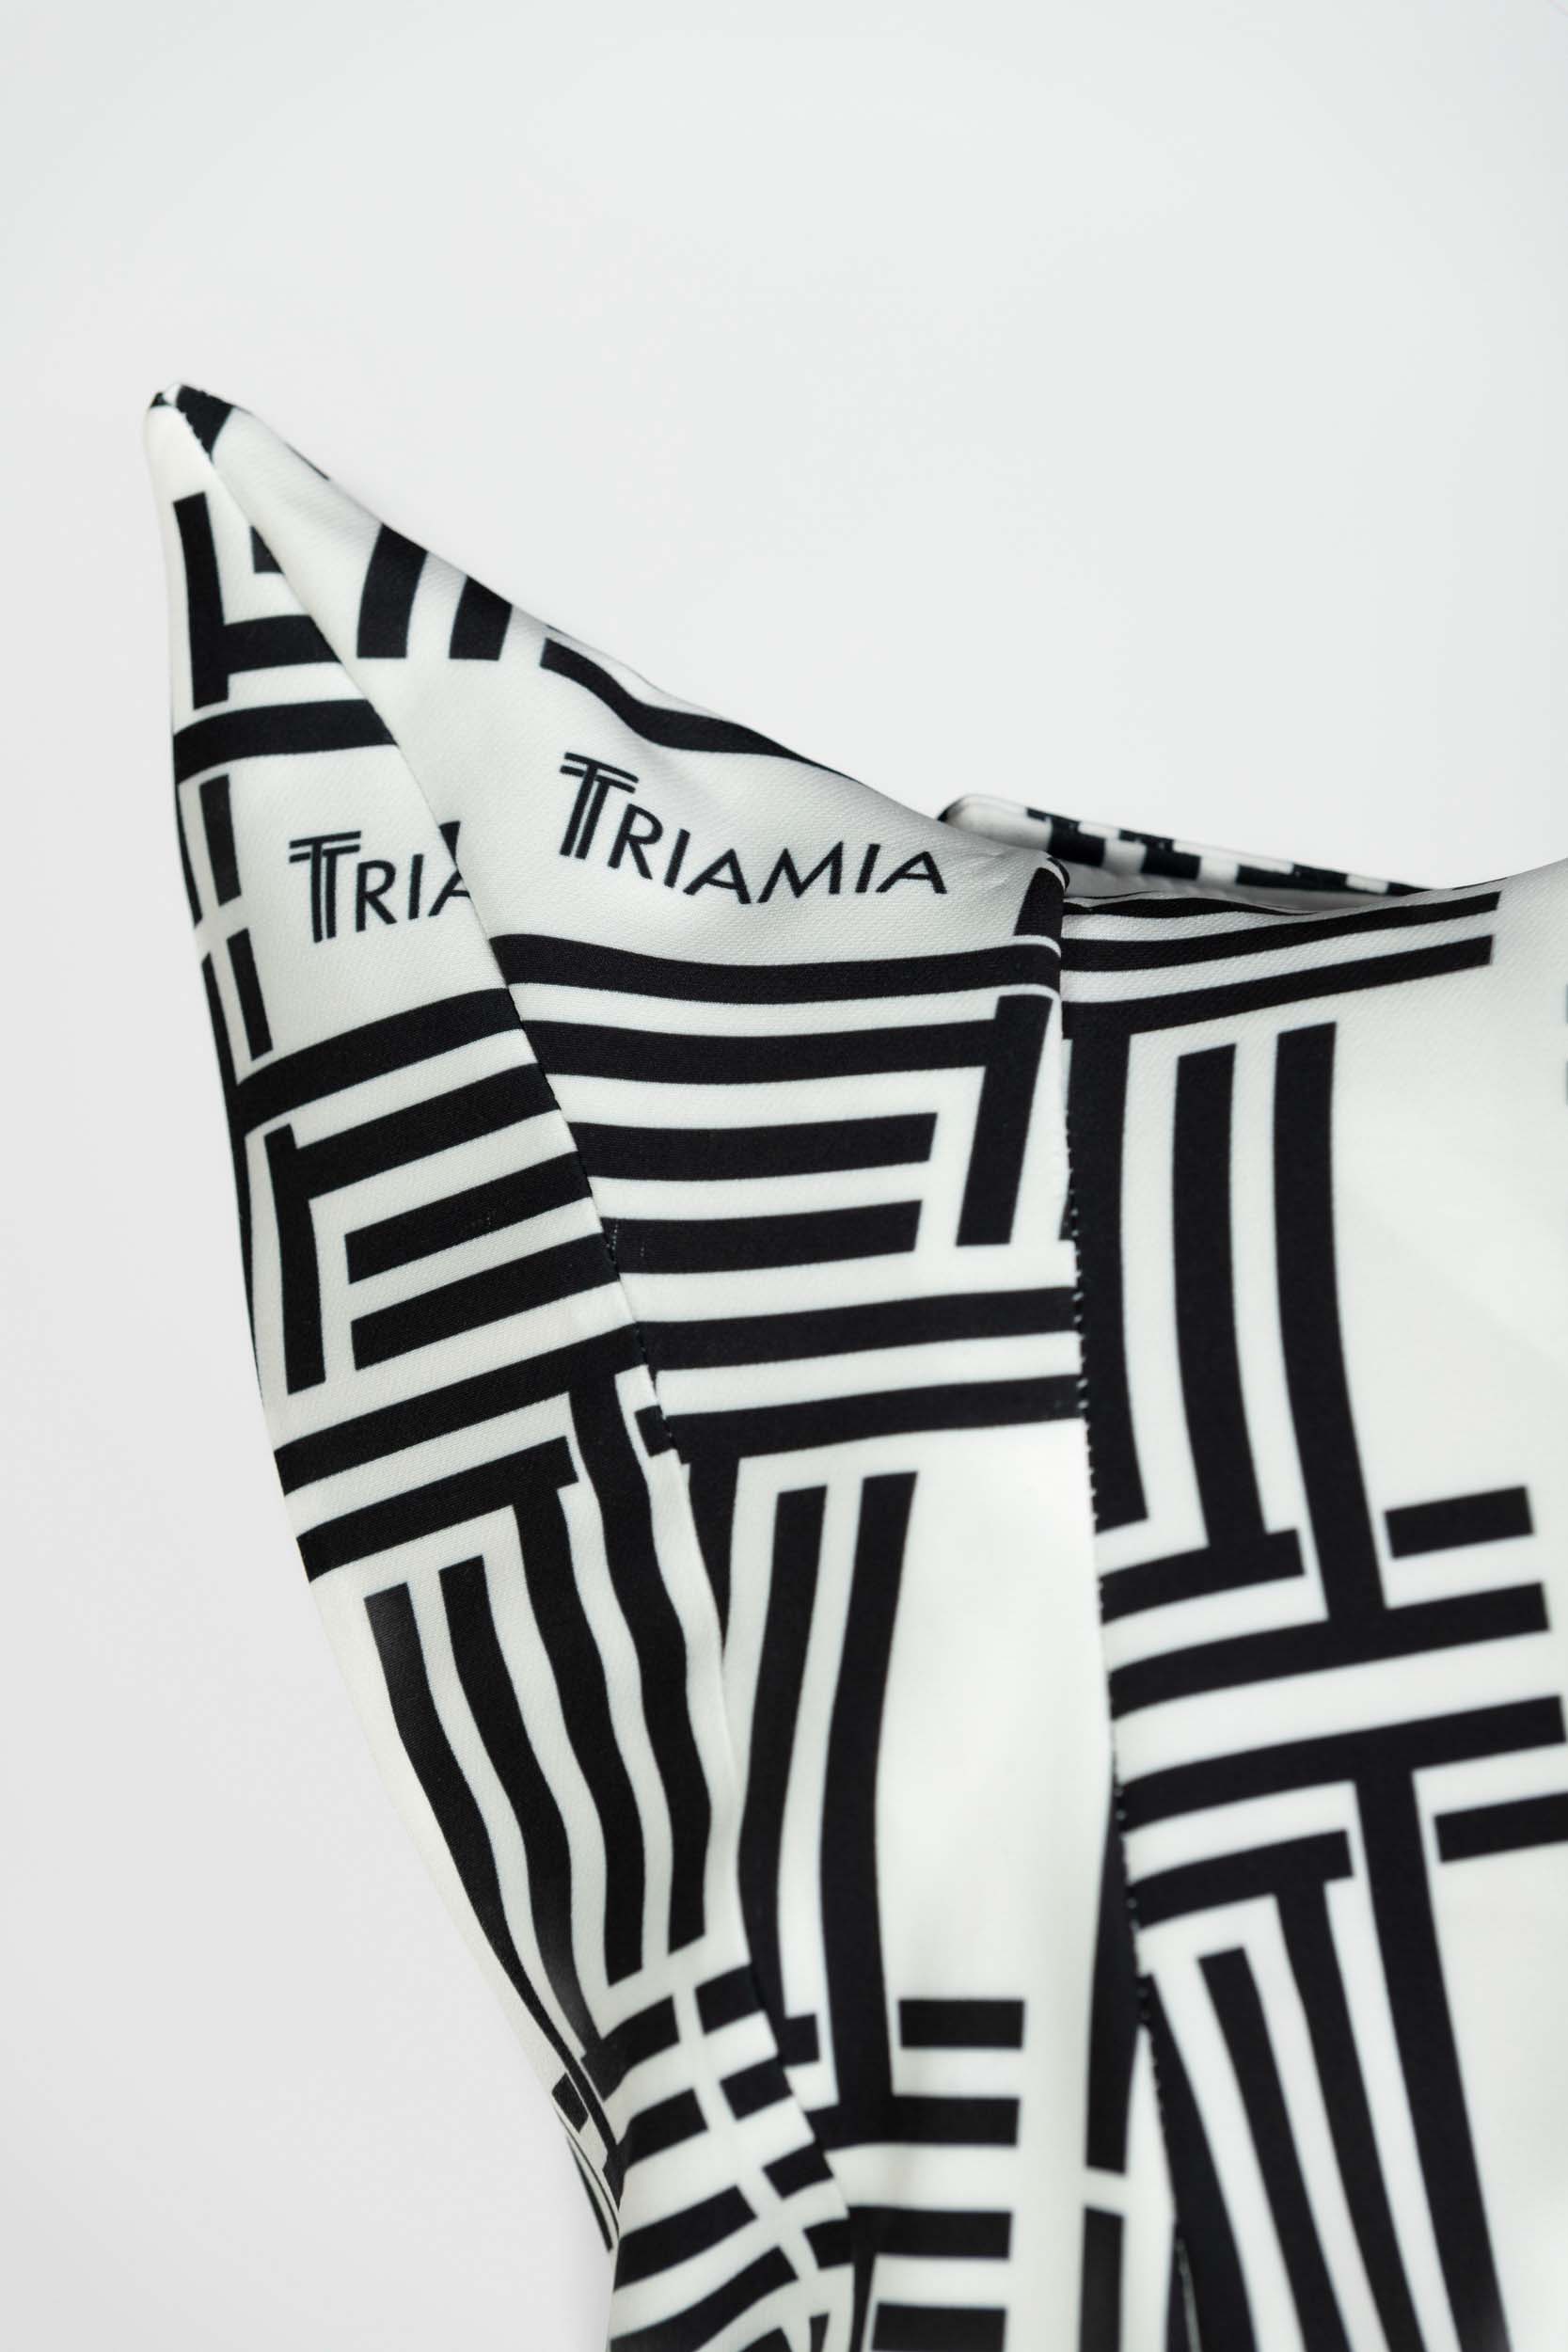 Blazer with triamia black and white pattern, pointed shoulders.